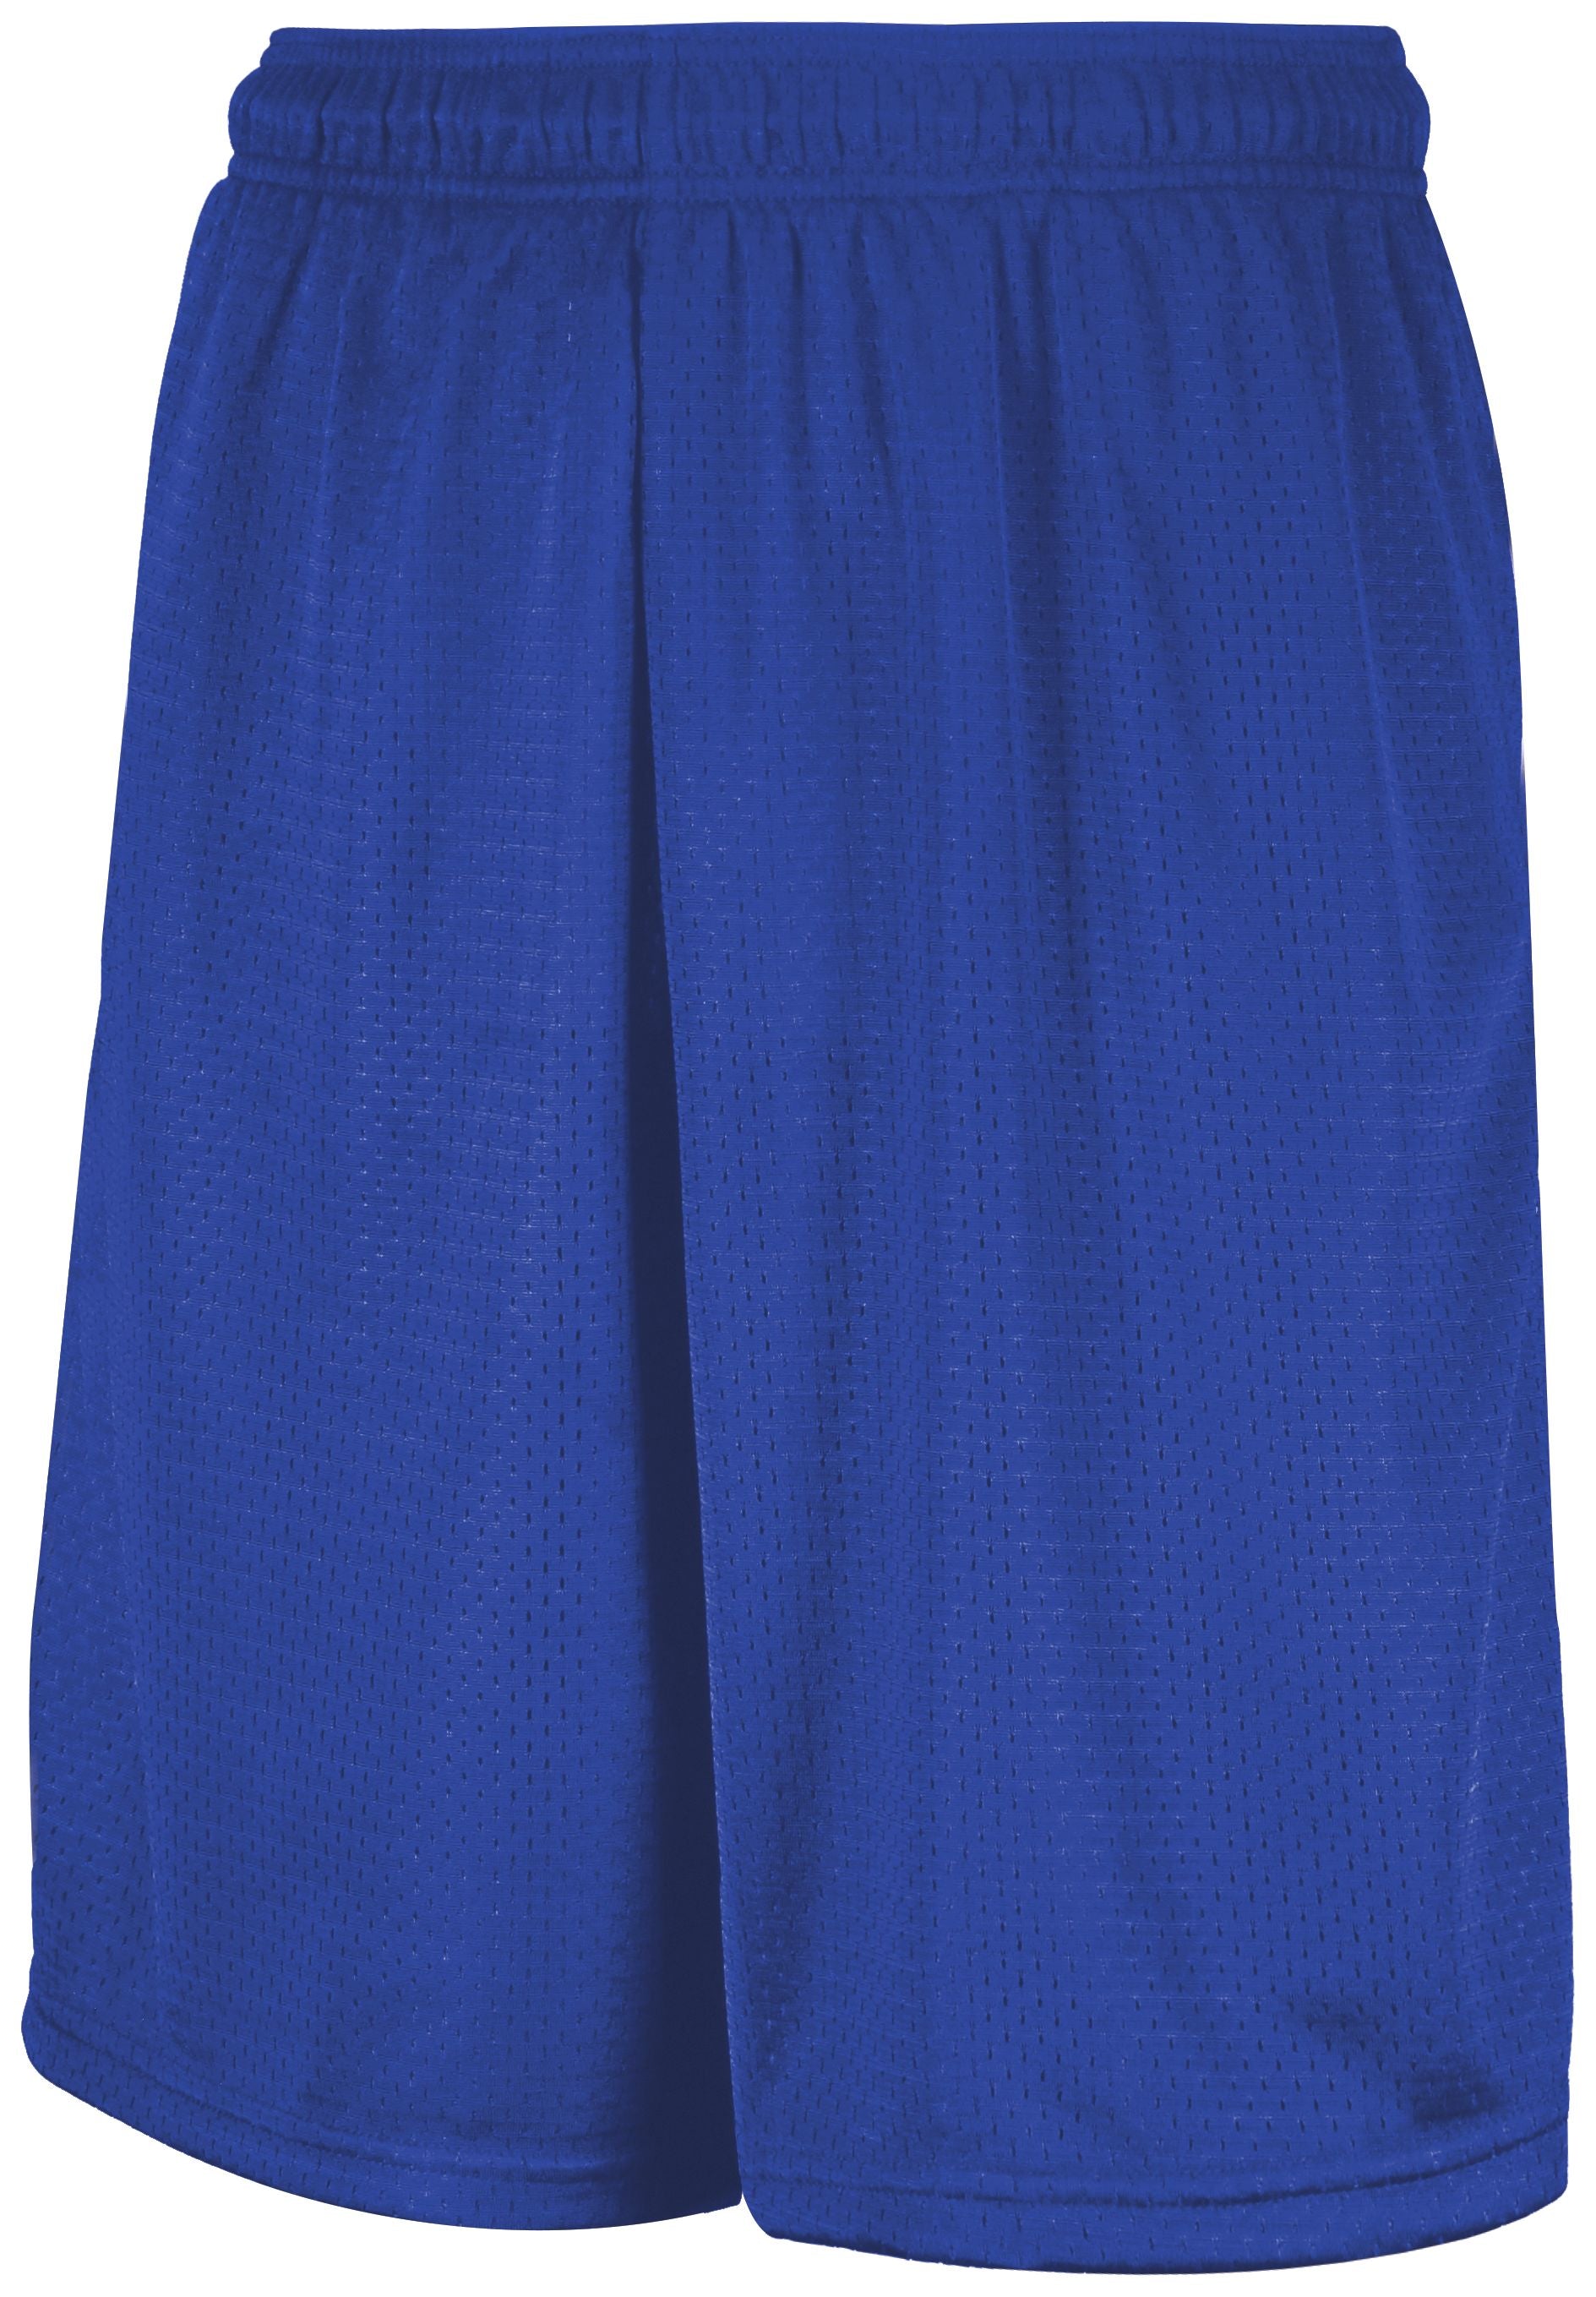 Russell Athletic Mesh Shorts With Pockets in Royal  -Part of the Adult, Adult-Shorts, Russell-Athletic-Products product lines at KanaleyCreations.com